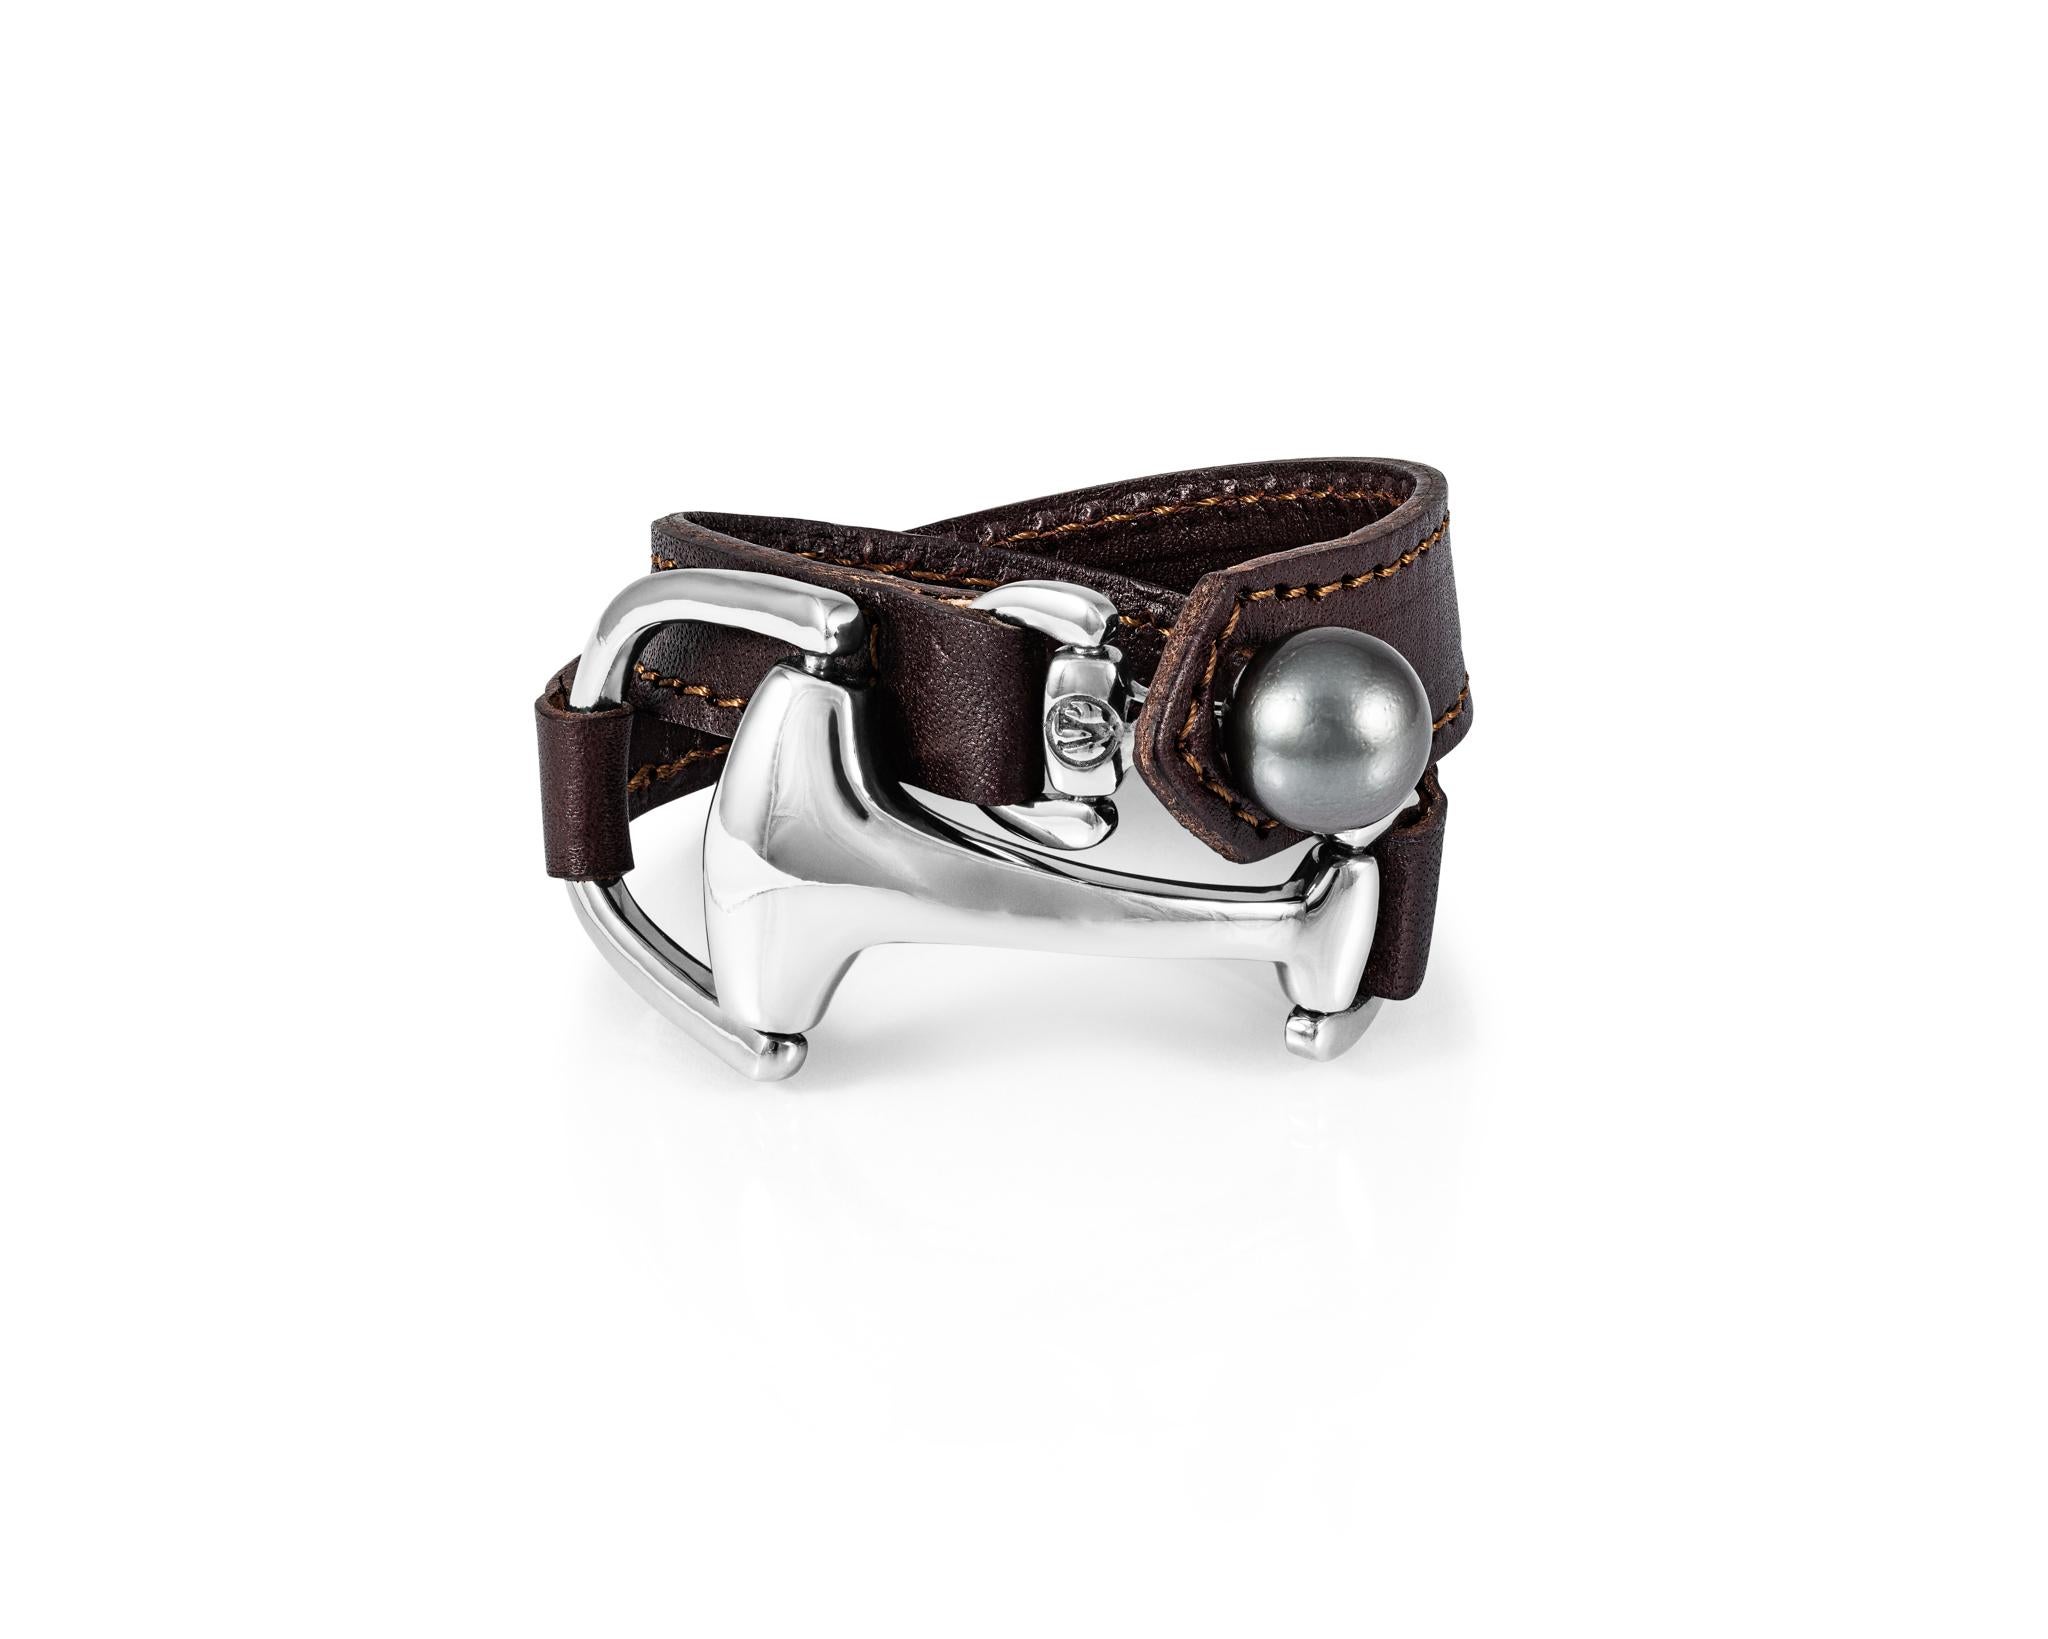 Part of the Vincent Peach Equestrian Collection, the signature Montana Cuff Bracelet and Choker has a Sterling Silver Snaffle Bit with Stitched, Premium-Quality Bovine Leather and a 13-14 mm Tahitian Pearl Clasp. Comes in standard 7